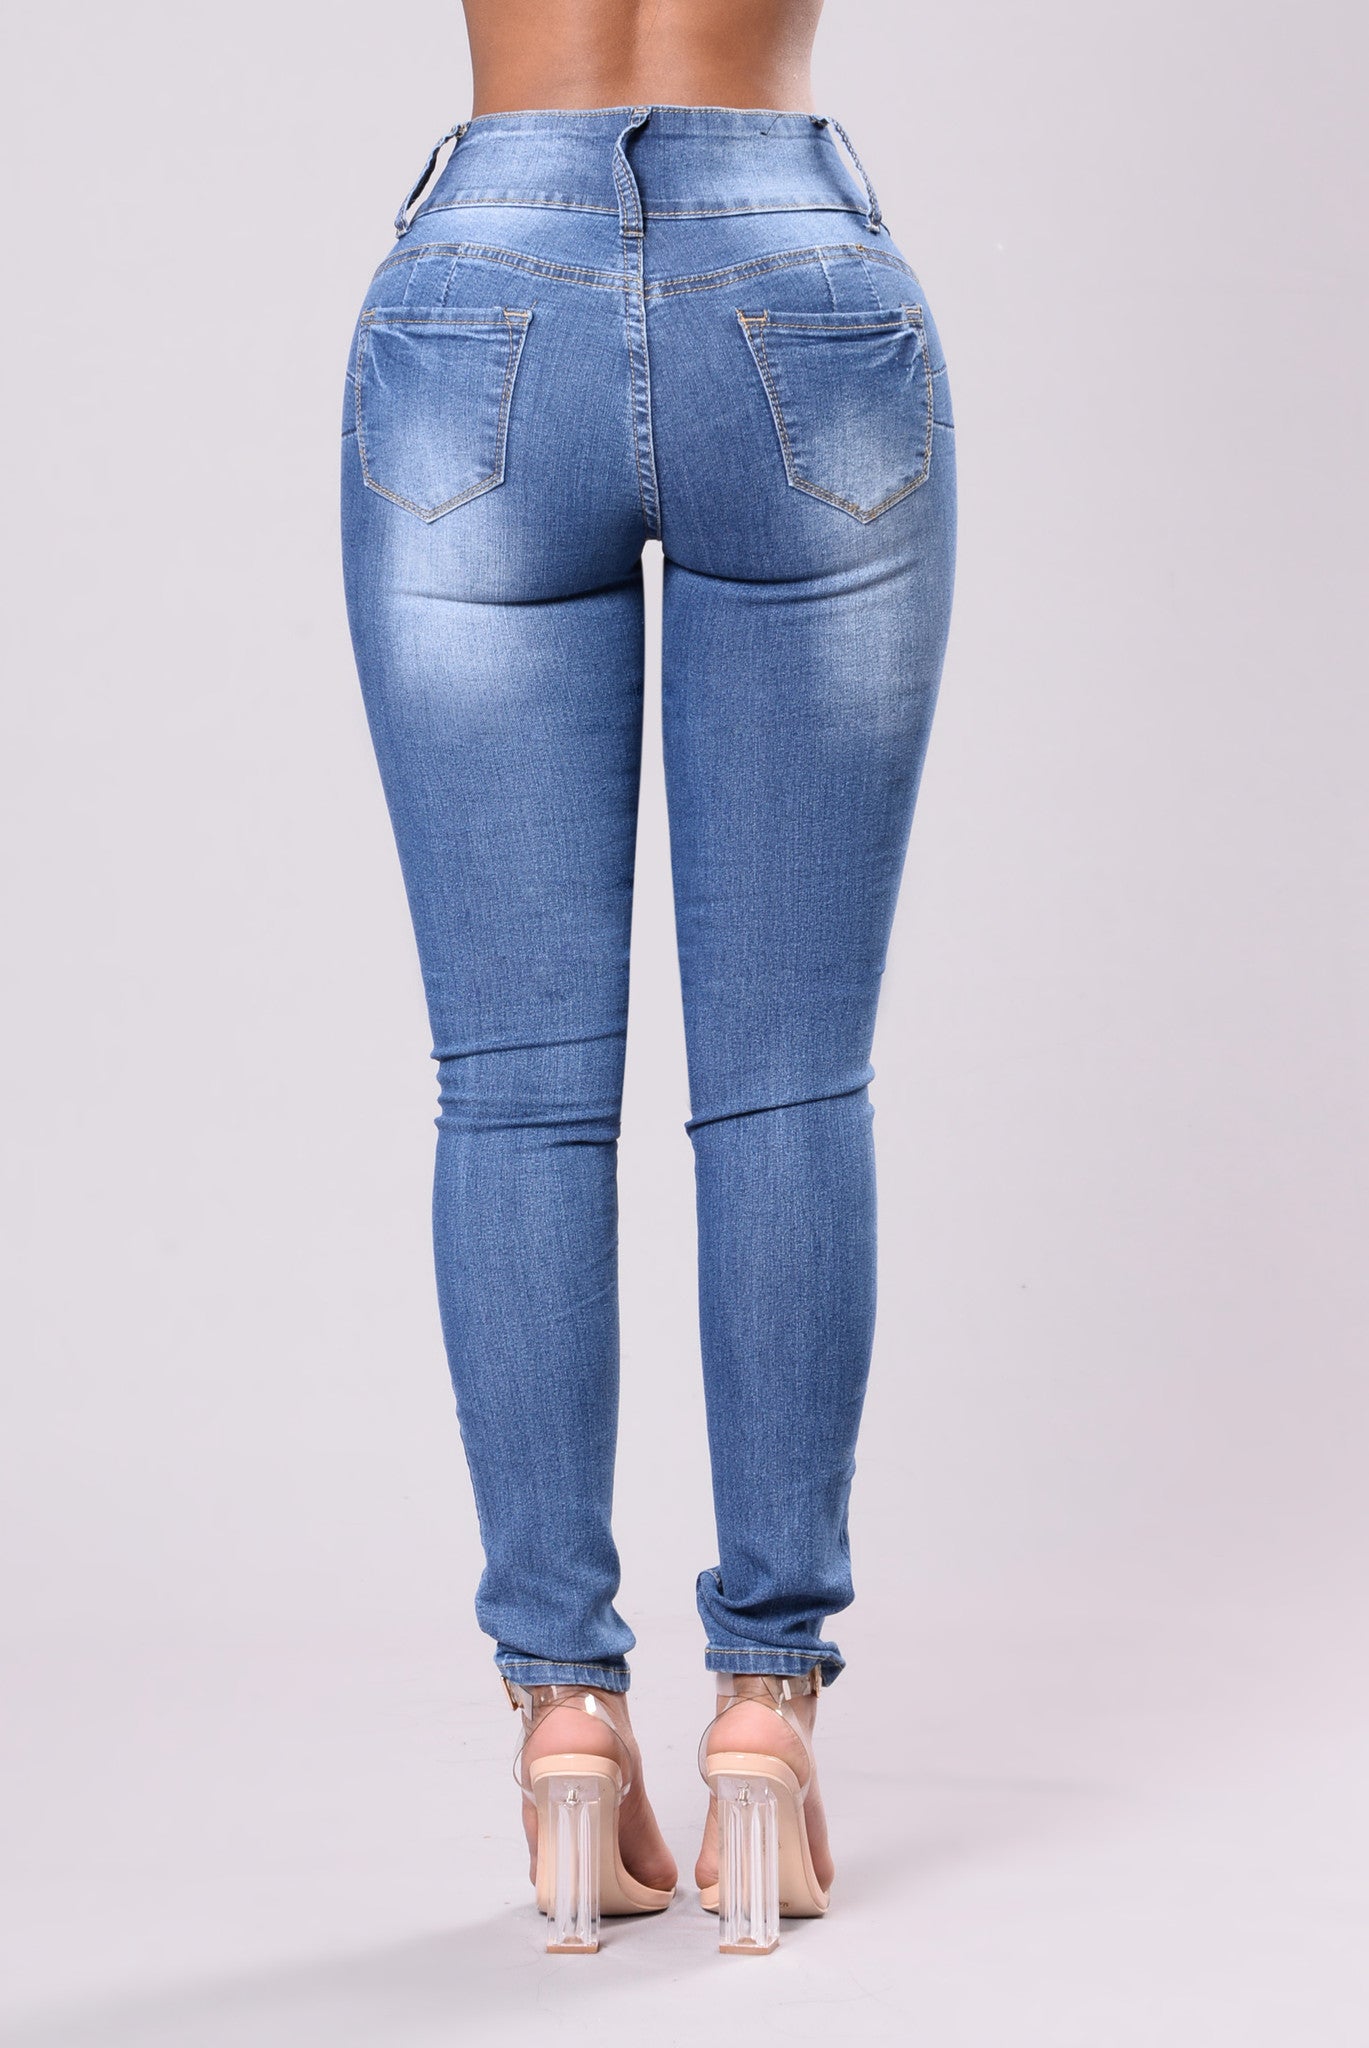 Jeans For Butt 108